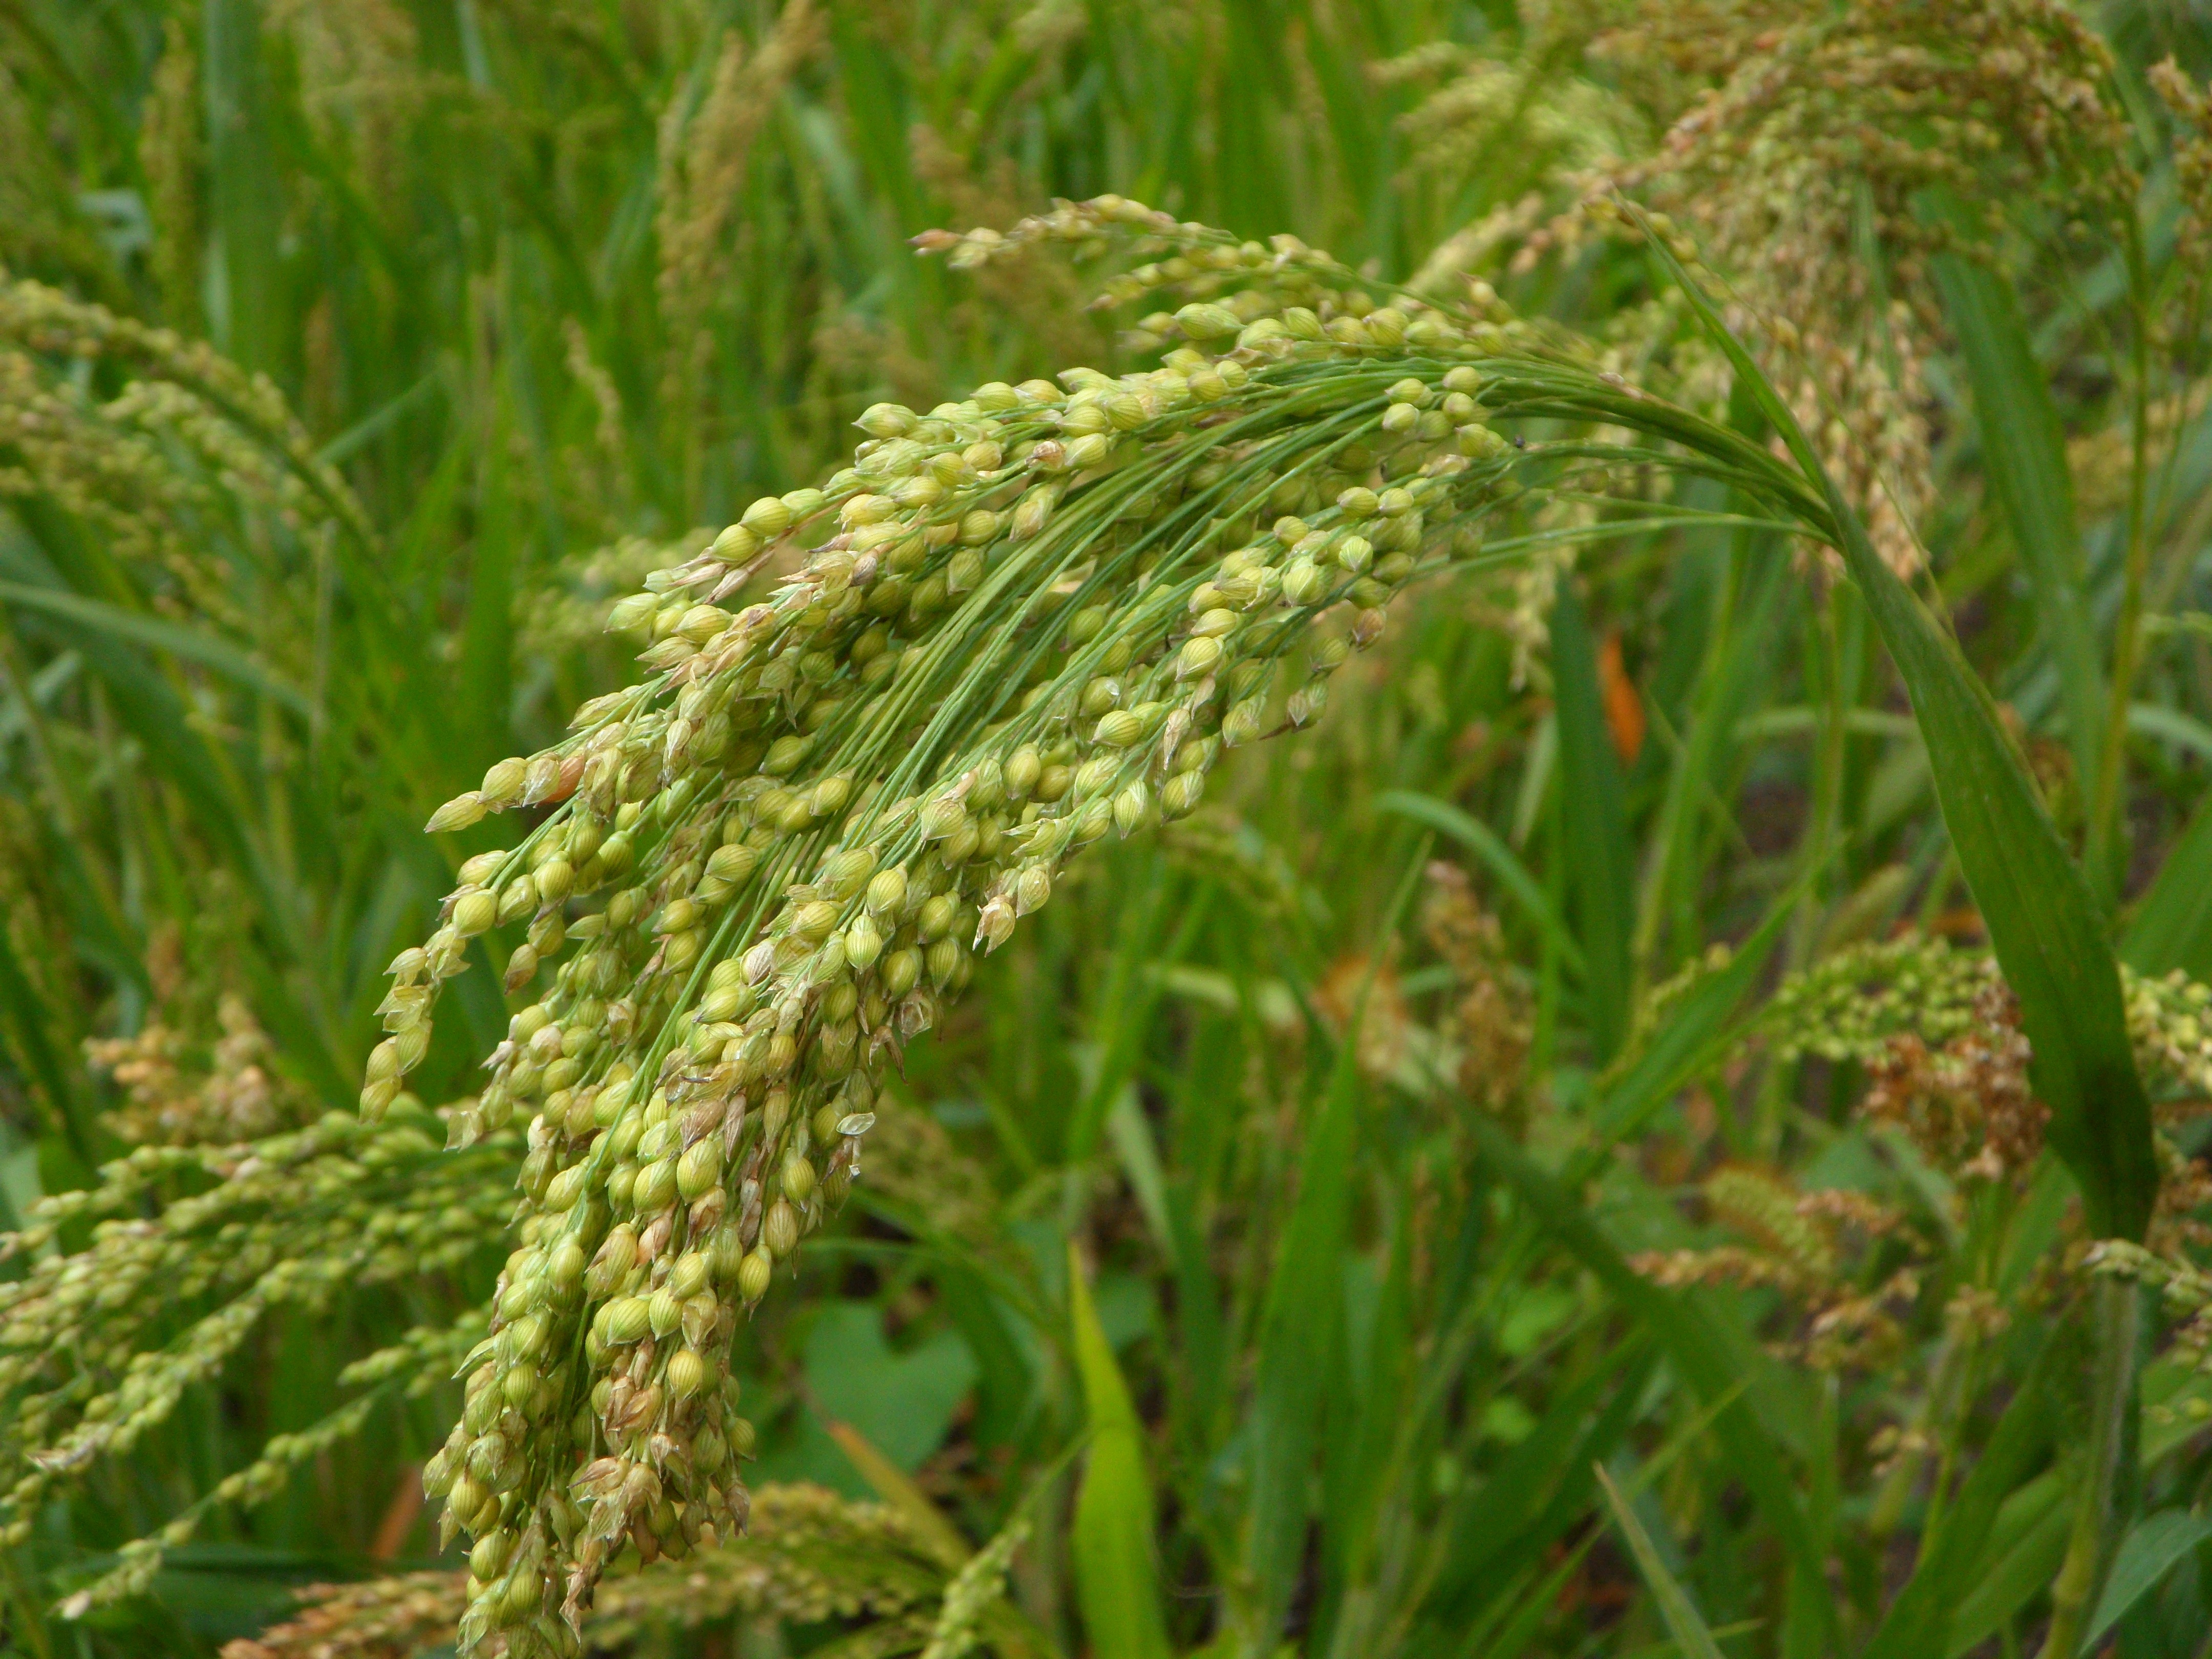 green plant growing in a field with small grains growing on the ends